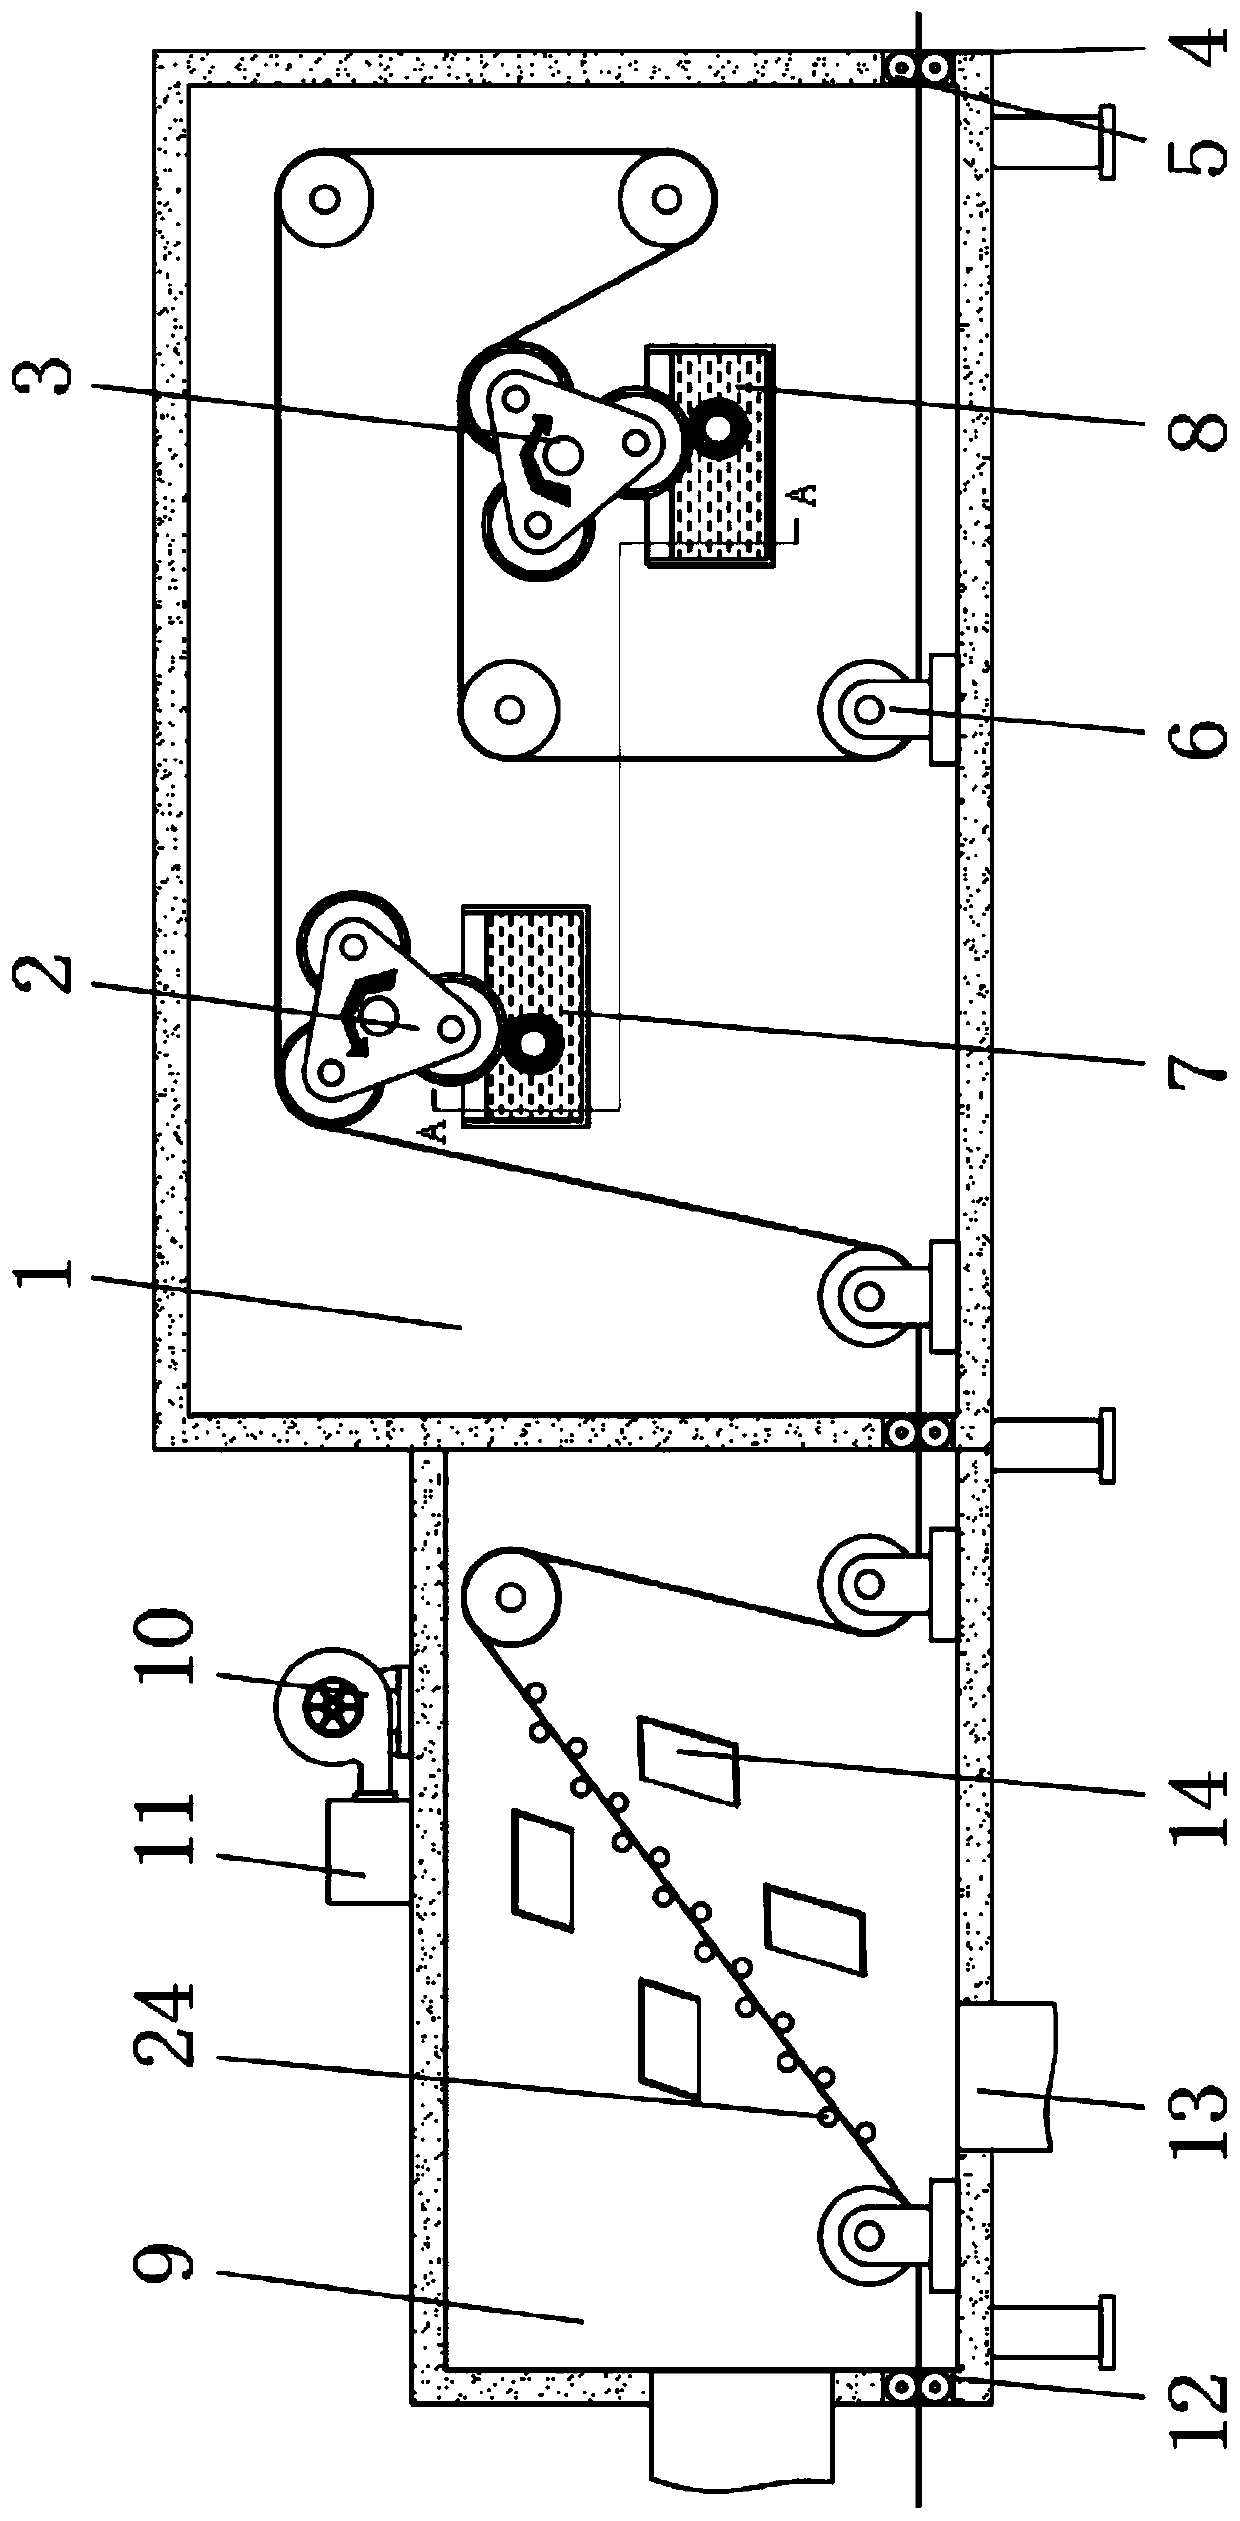 Surface cleaning treatment device for cotton cloth production